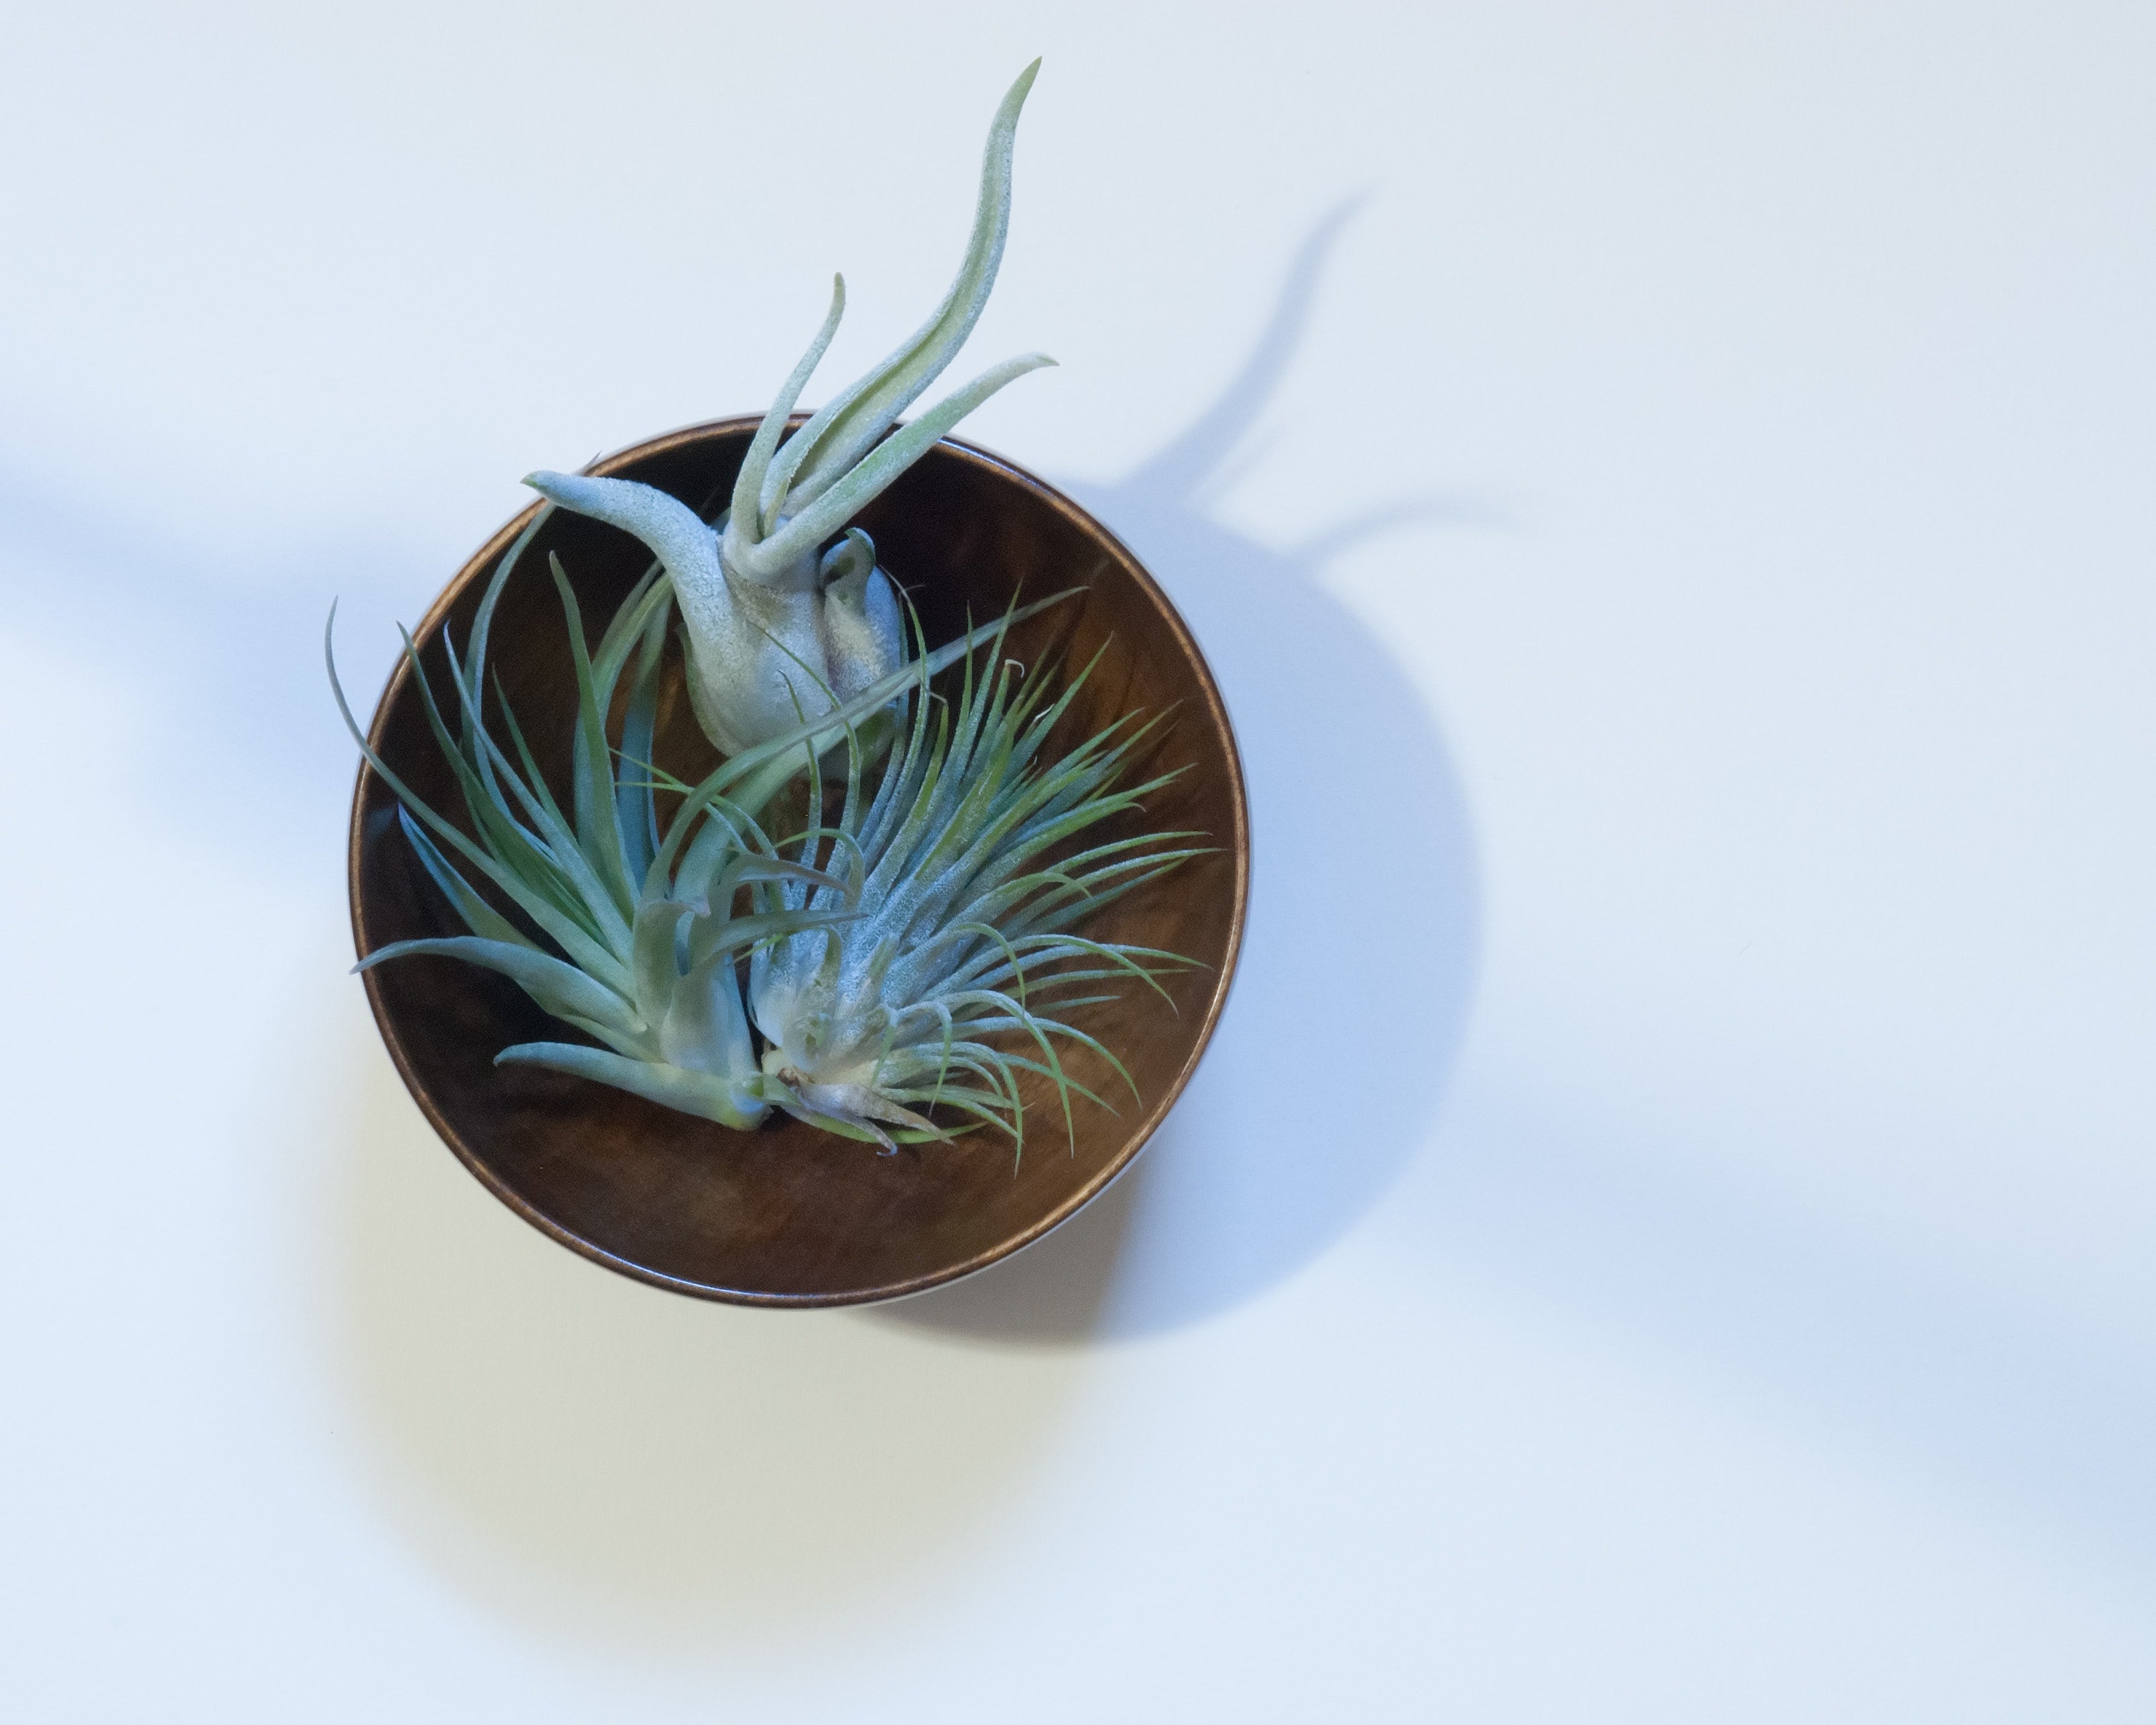 How to care for your air plant